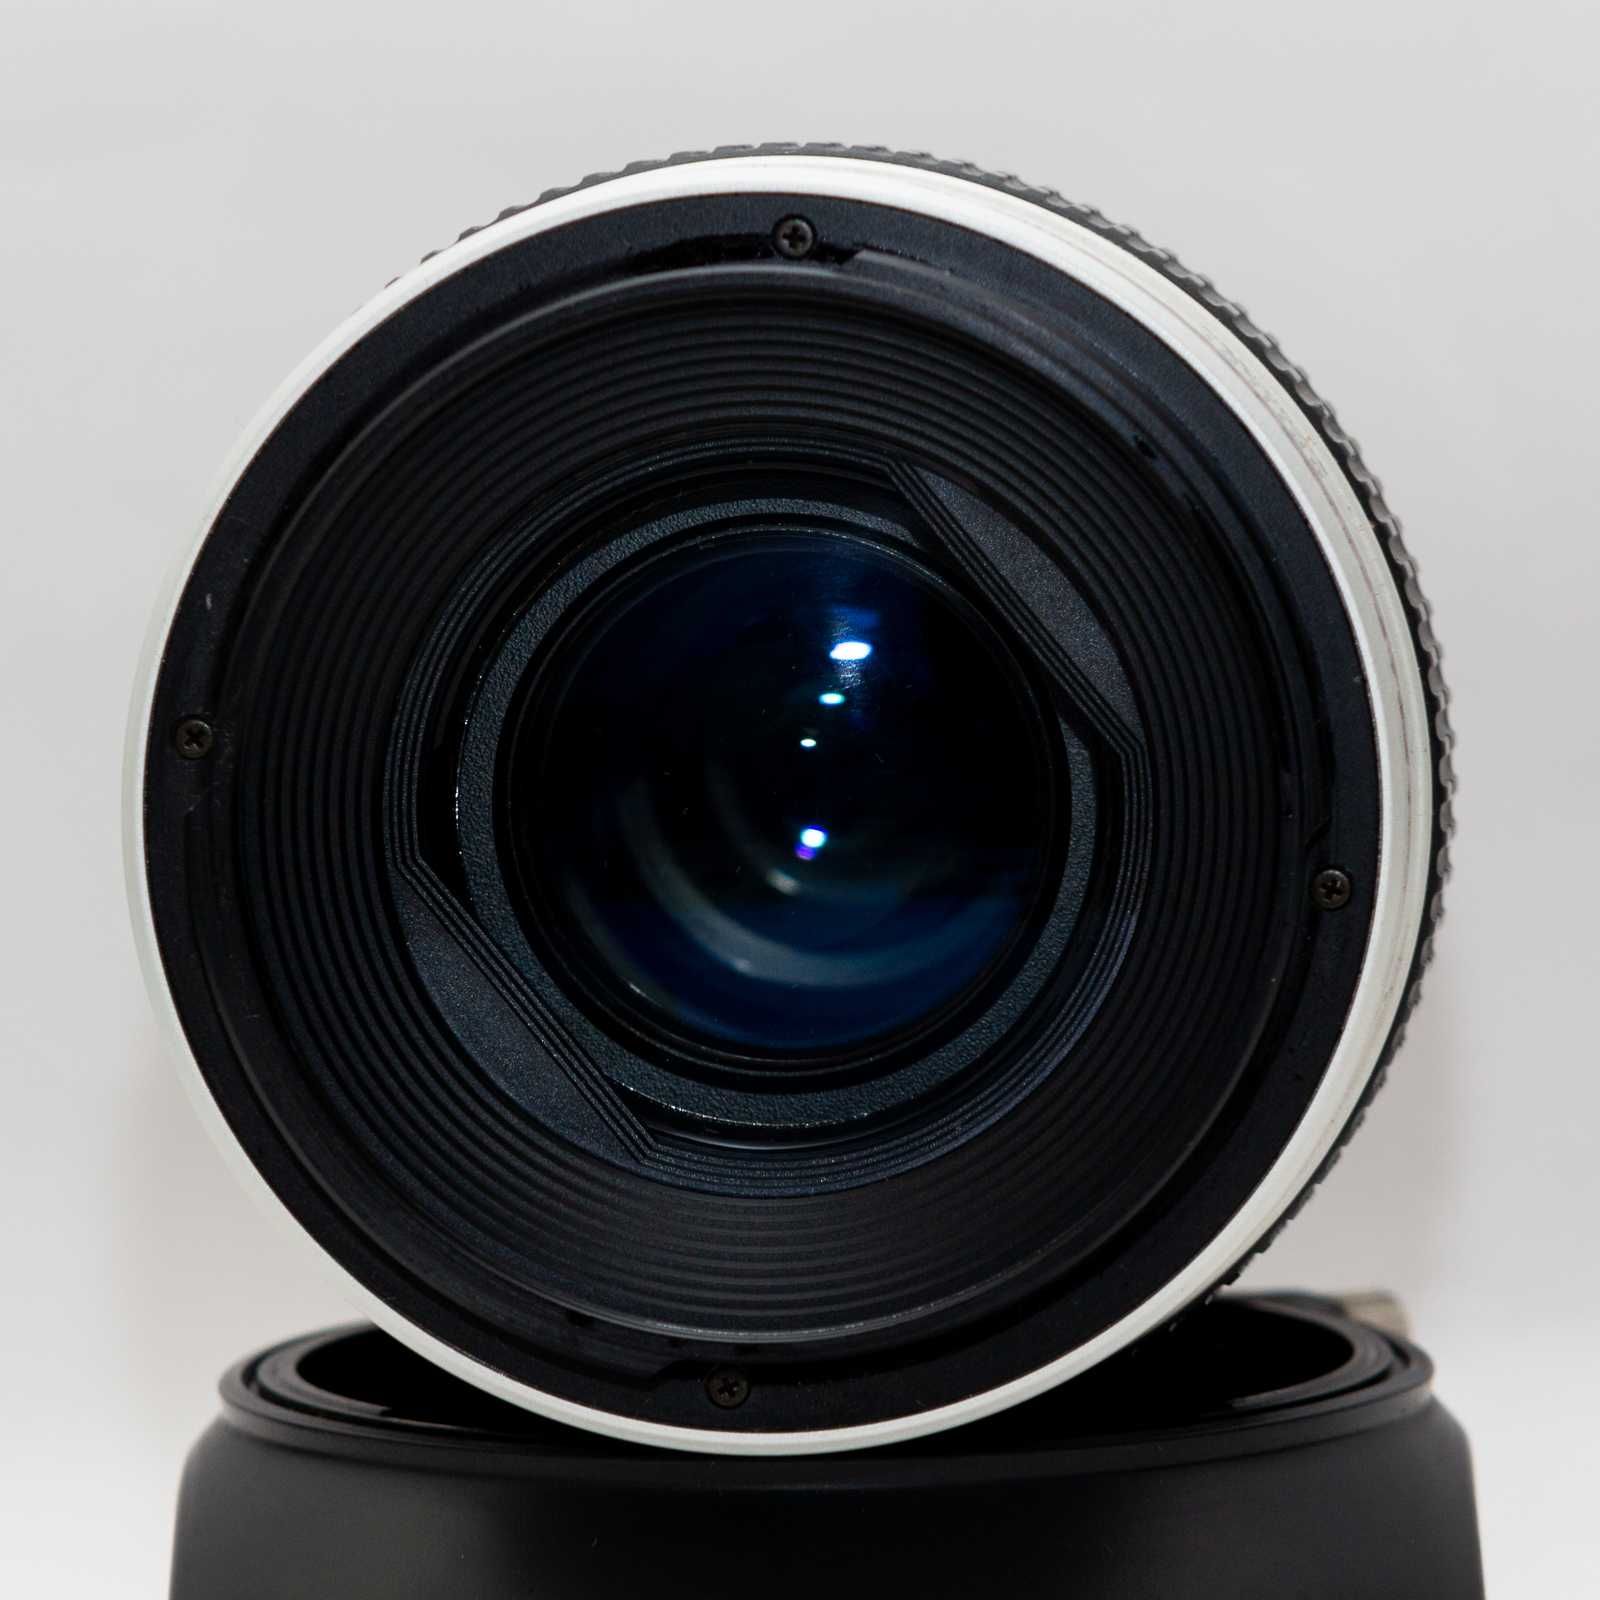 Canon Video Lens 16X IS - 5.5-88mm f/1.6-2.6 - XL Mount